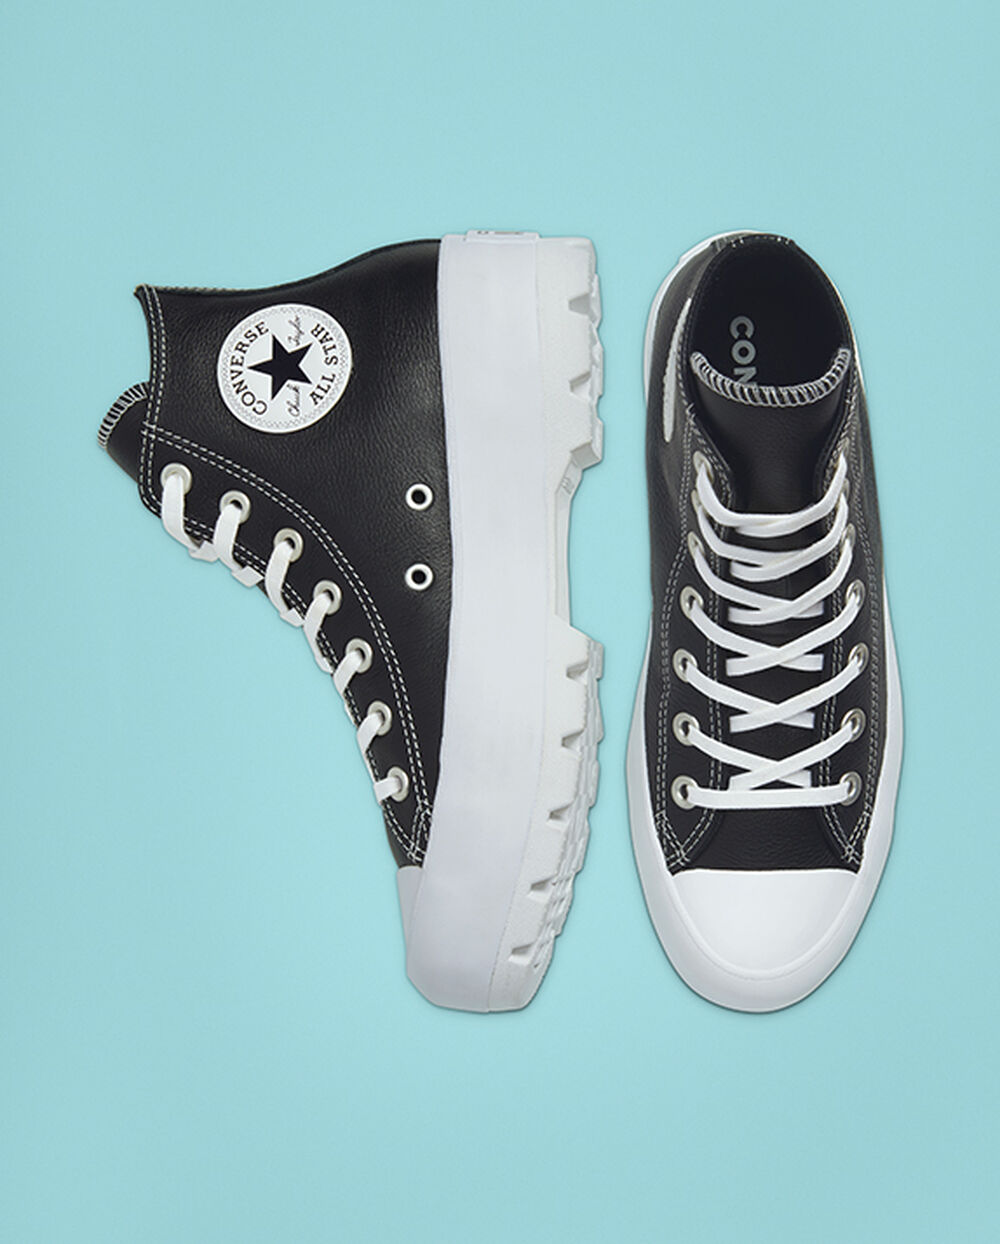 Tenis Converse Chuck Taylor All Star Mujer Negros Blancos | Mexico-874266